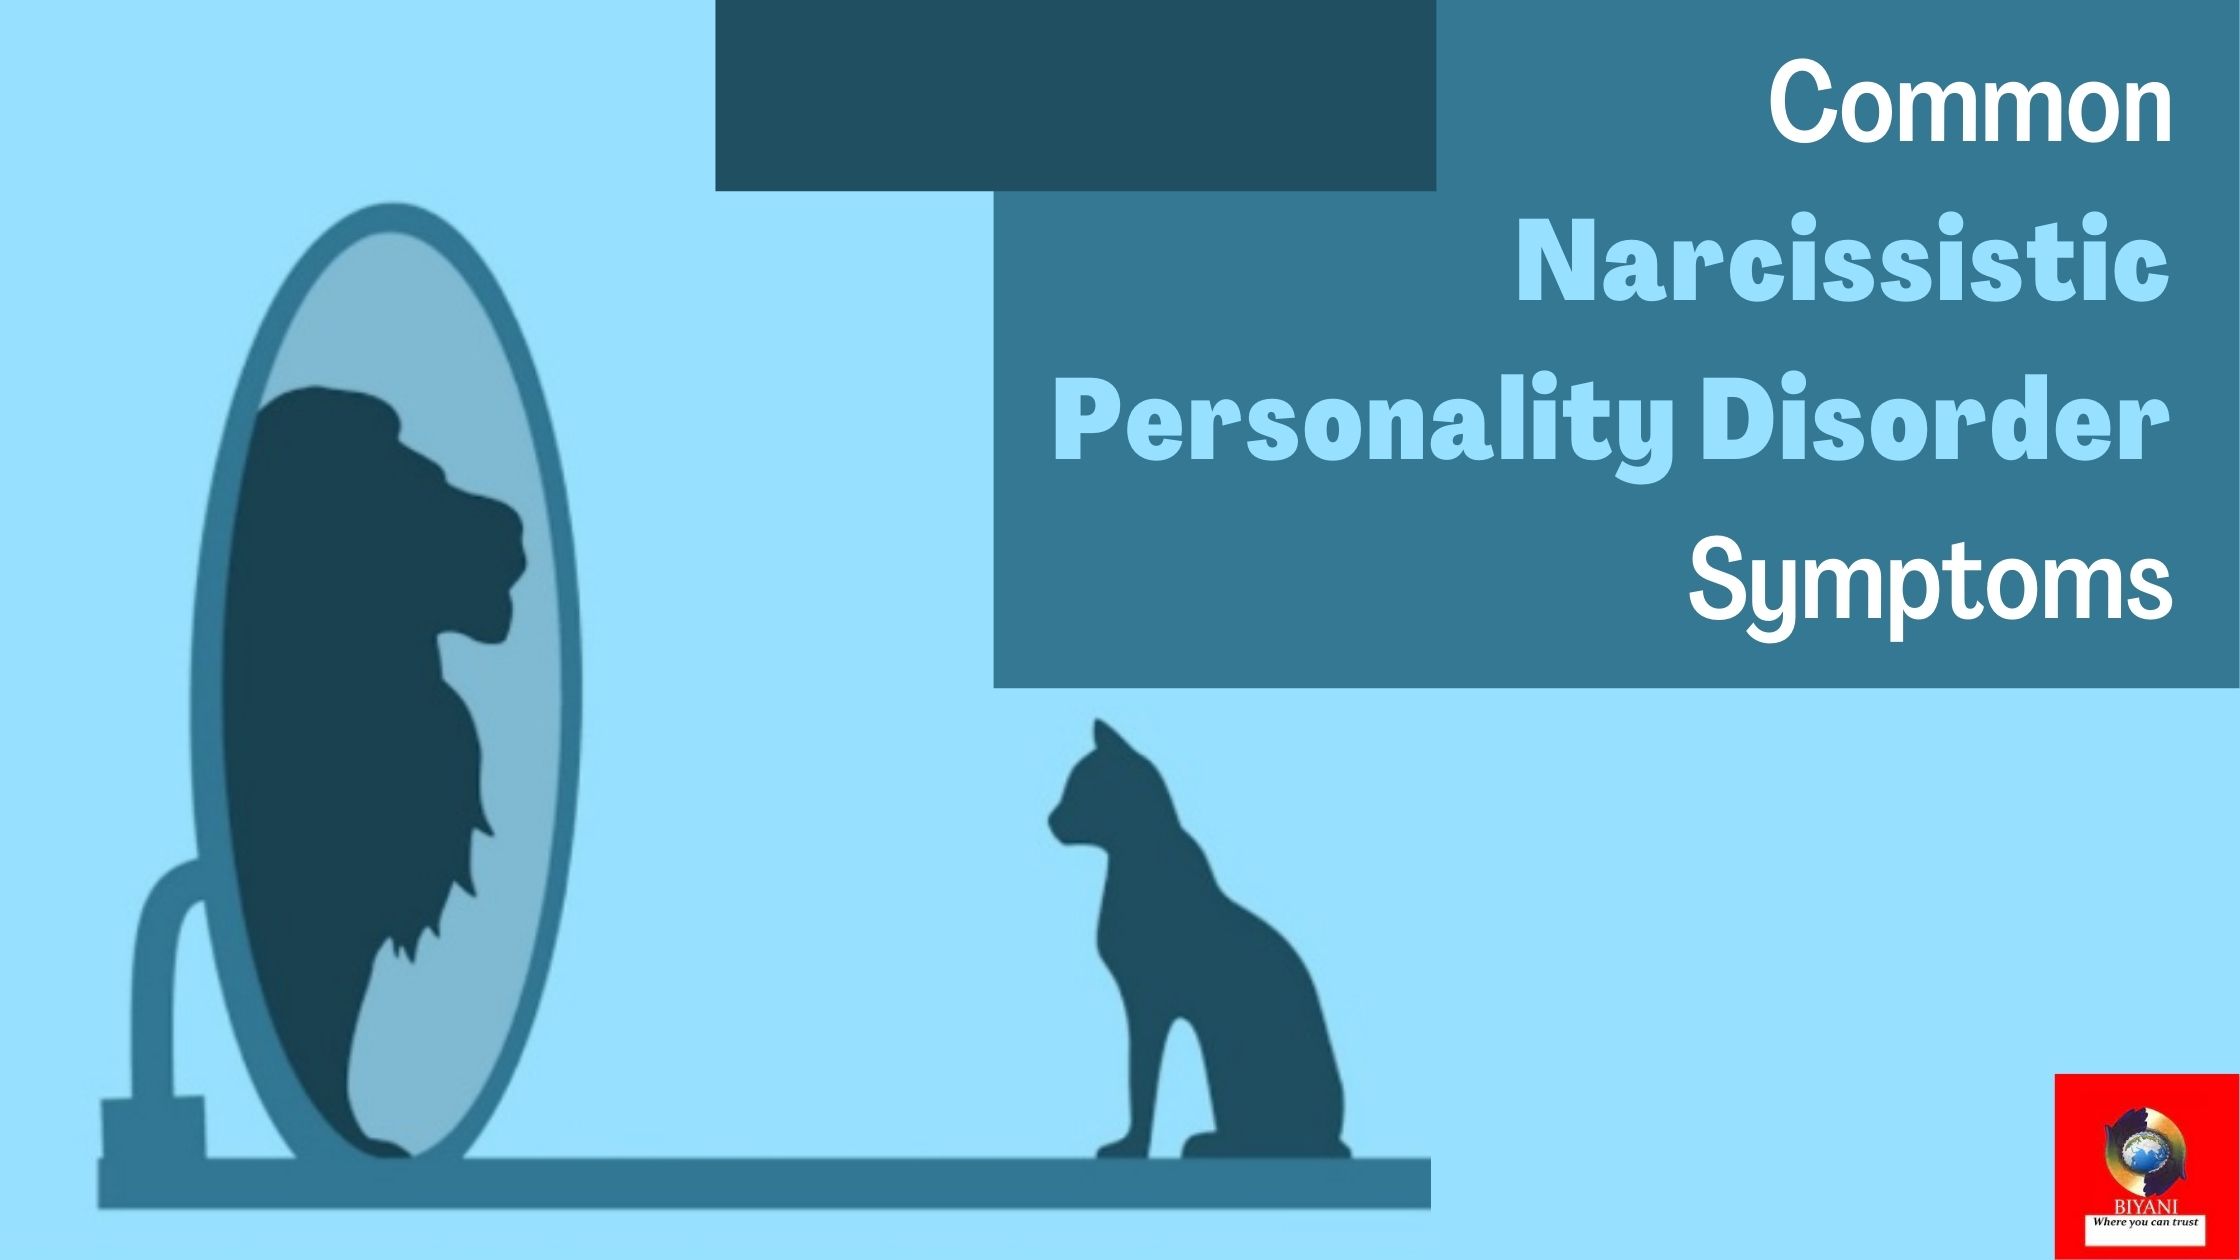 common narcissistic personality disorder symptoms